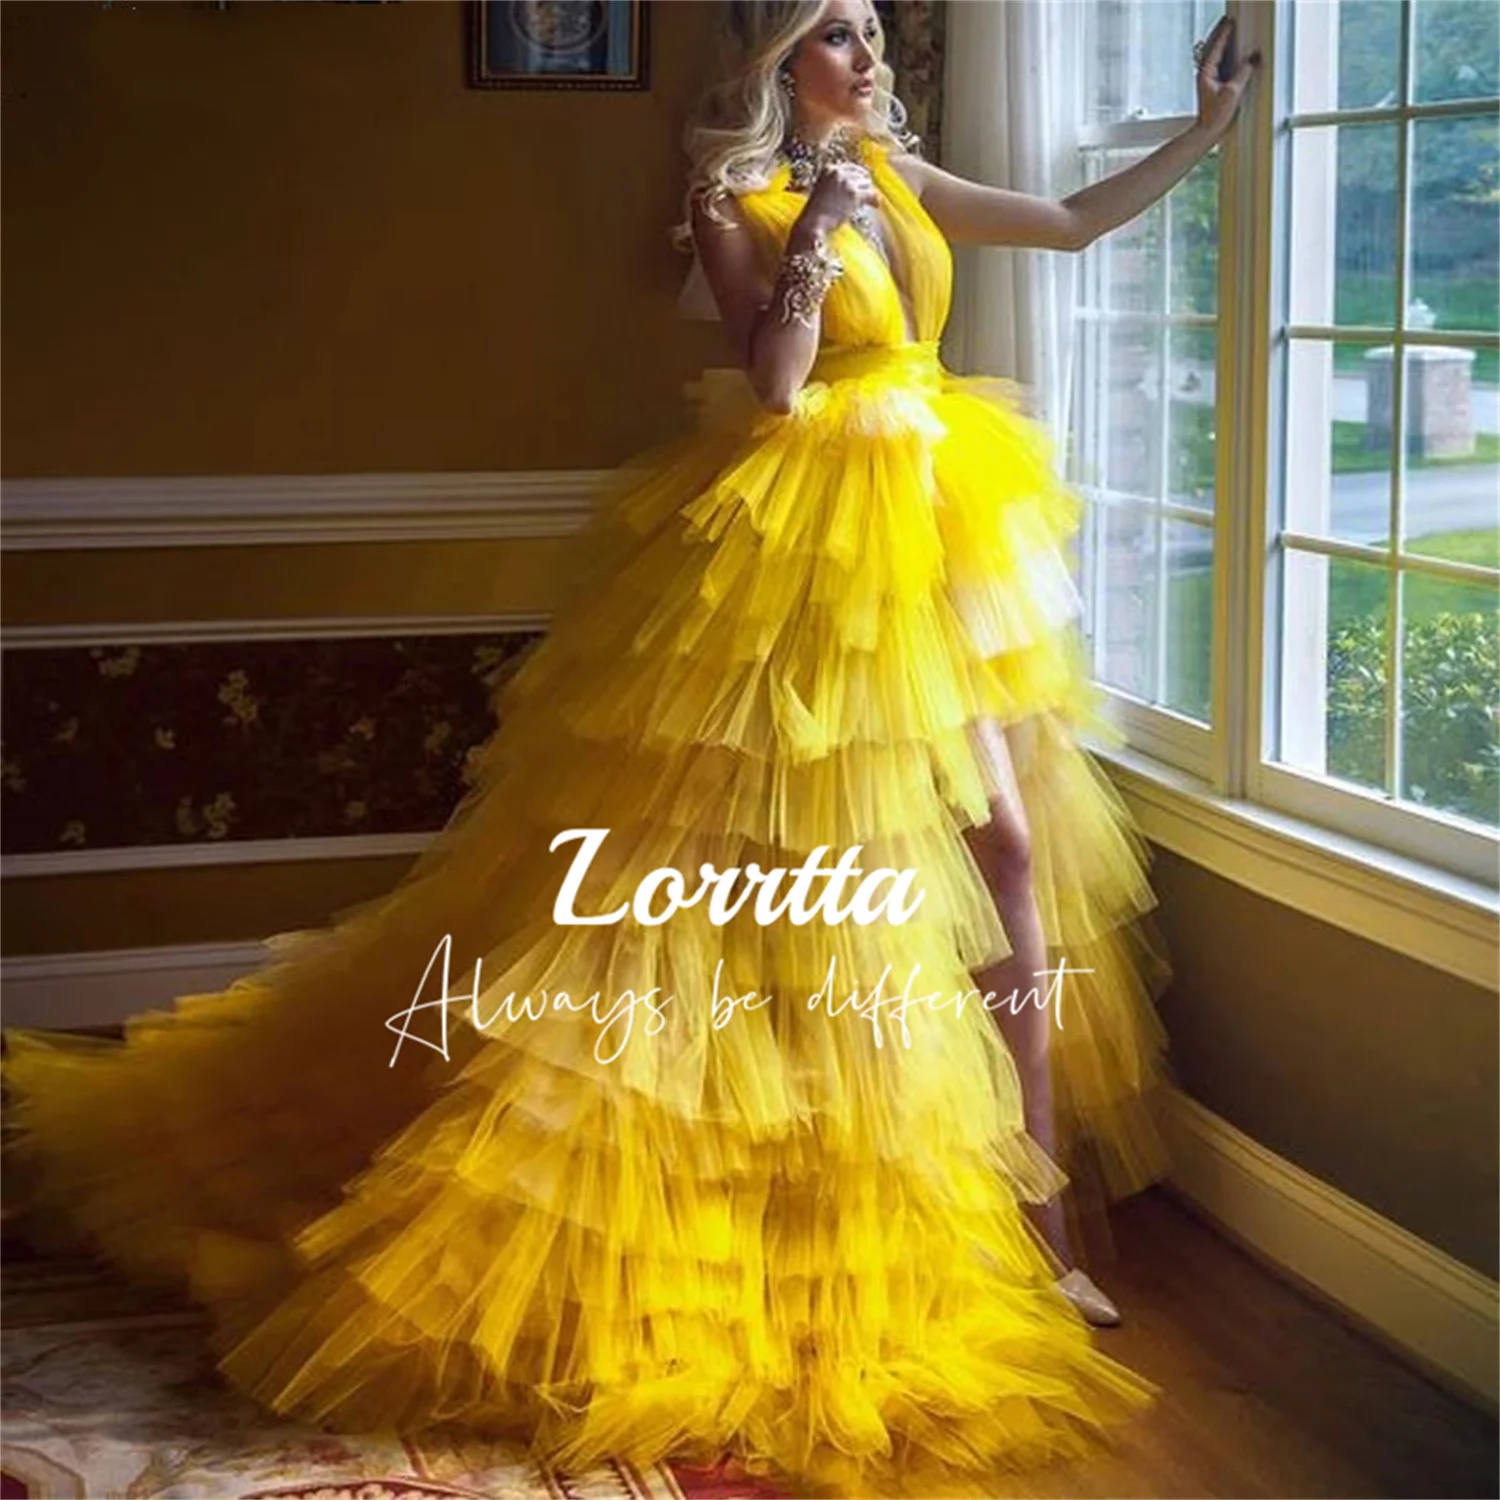 

Lorrtta V-neck Layered Side Slit Yellow Tulle Prom Dress Folds Floor-length Princess Evening Sexy Dresses Formal Party Gowns